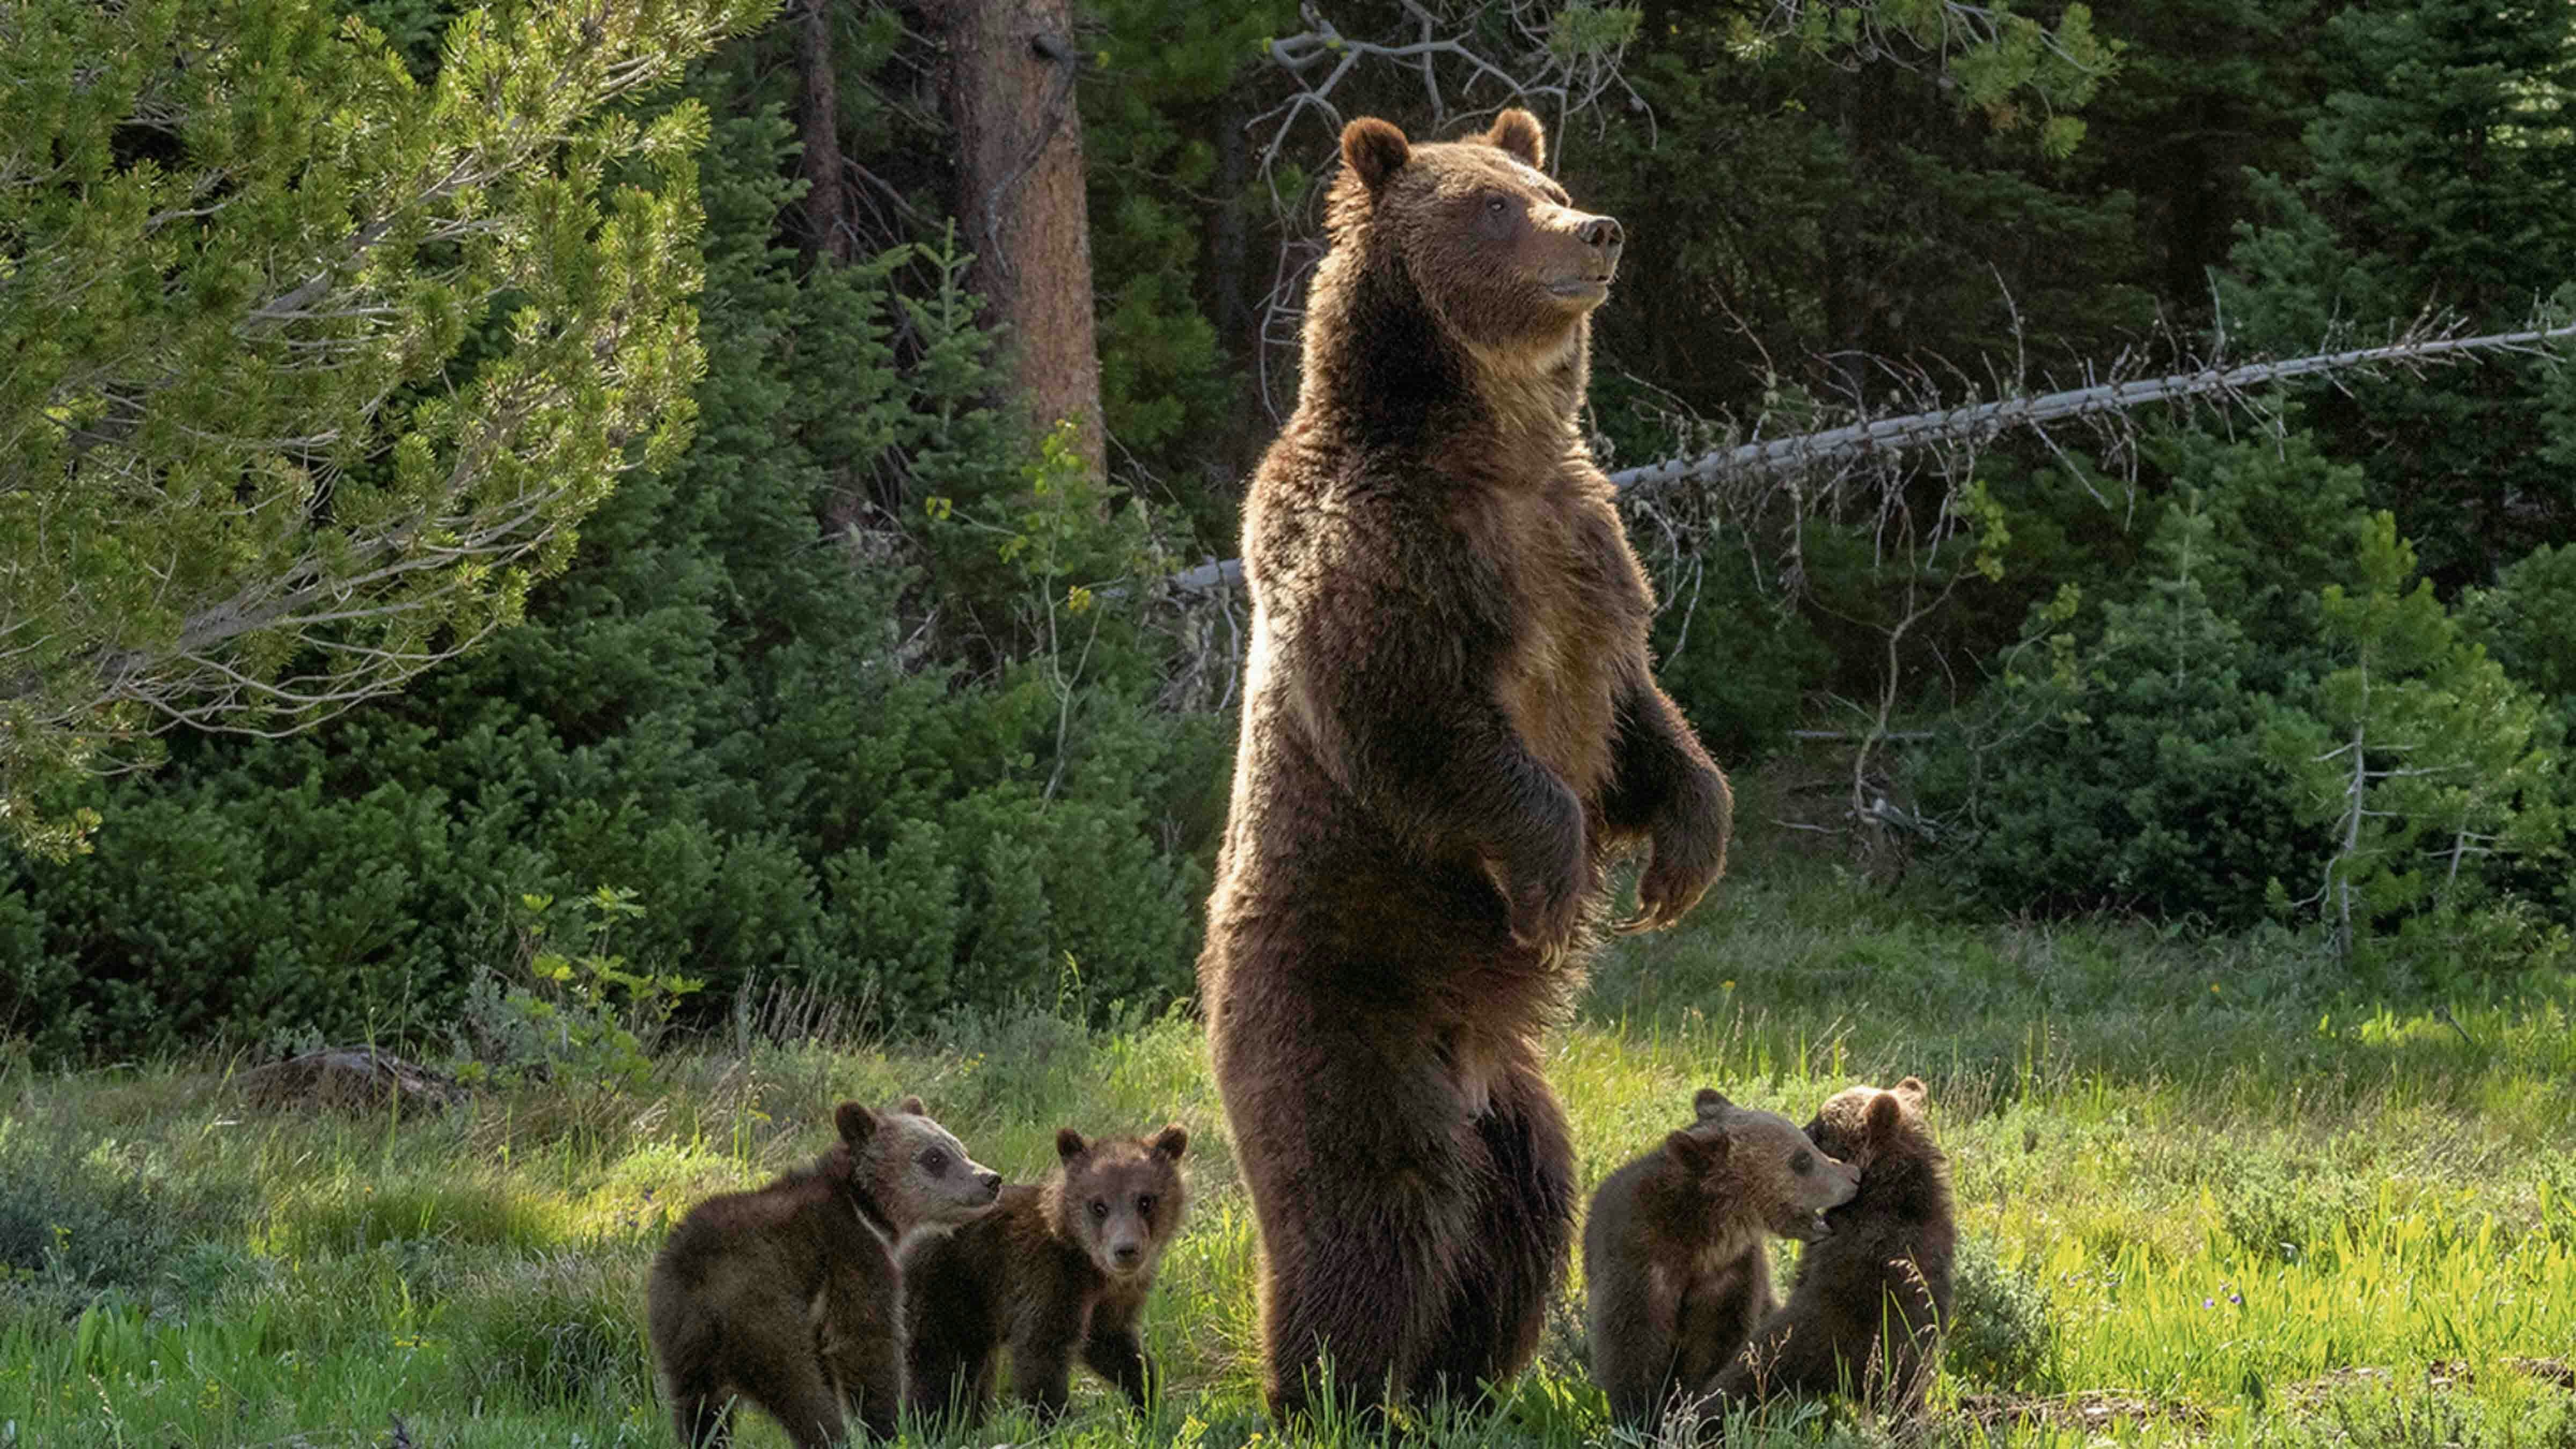 Grizzly 399 and her four cubs